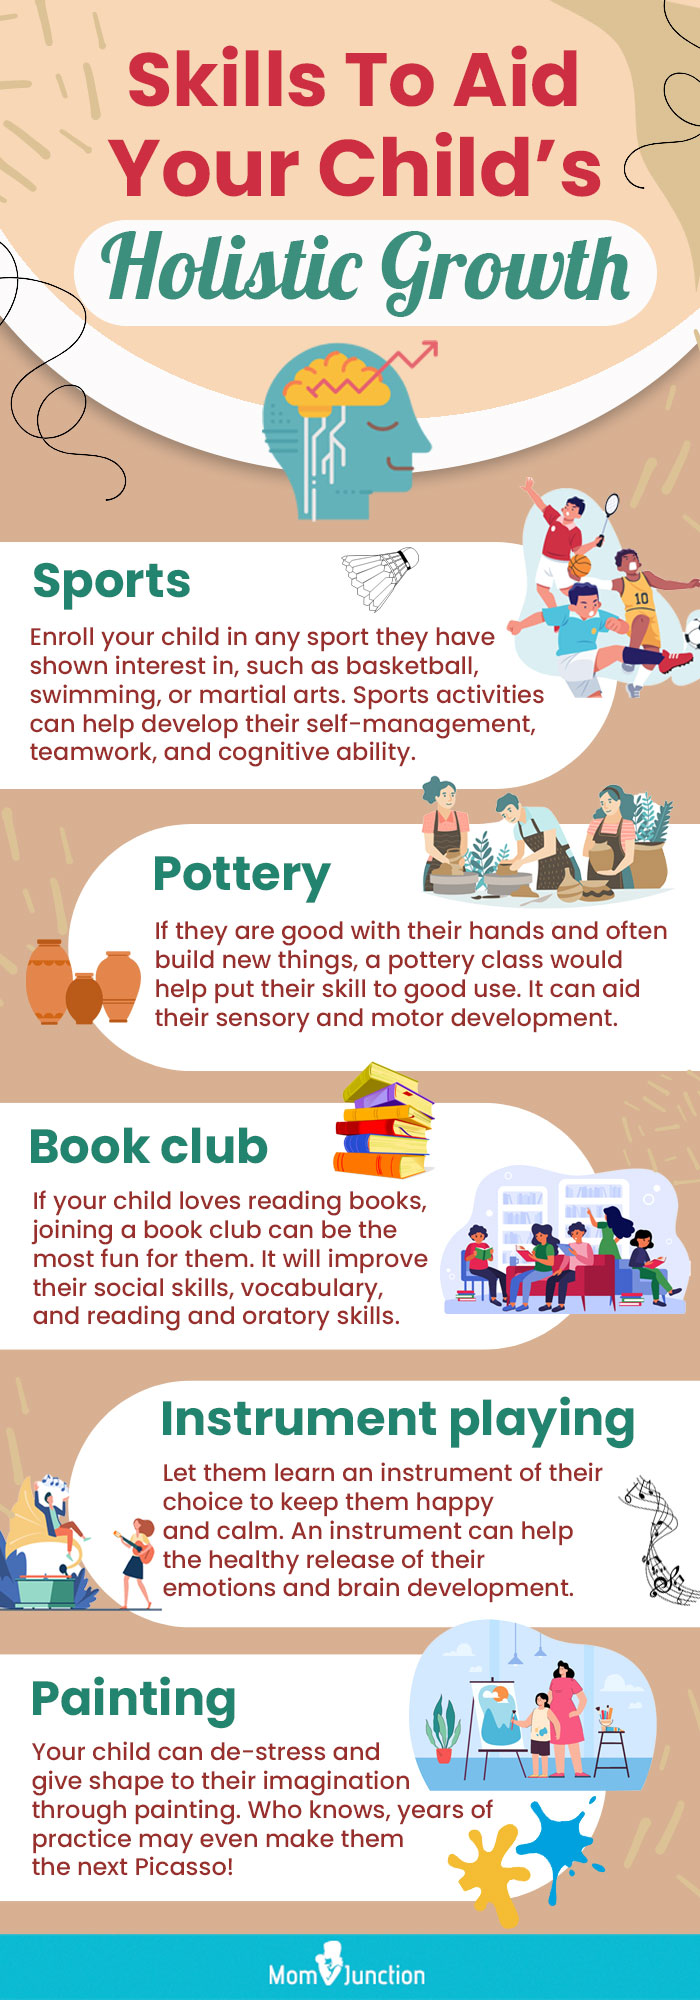 skills to aid your childs holistic growth [infographic]